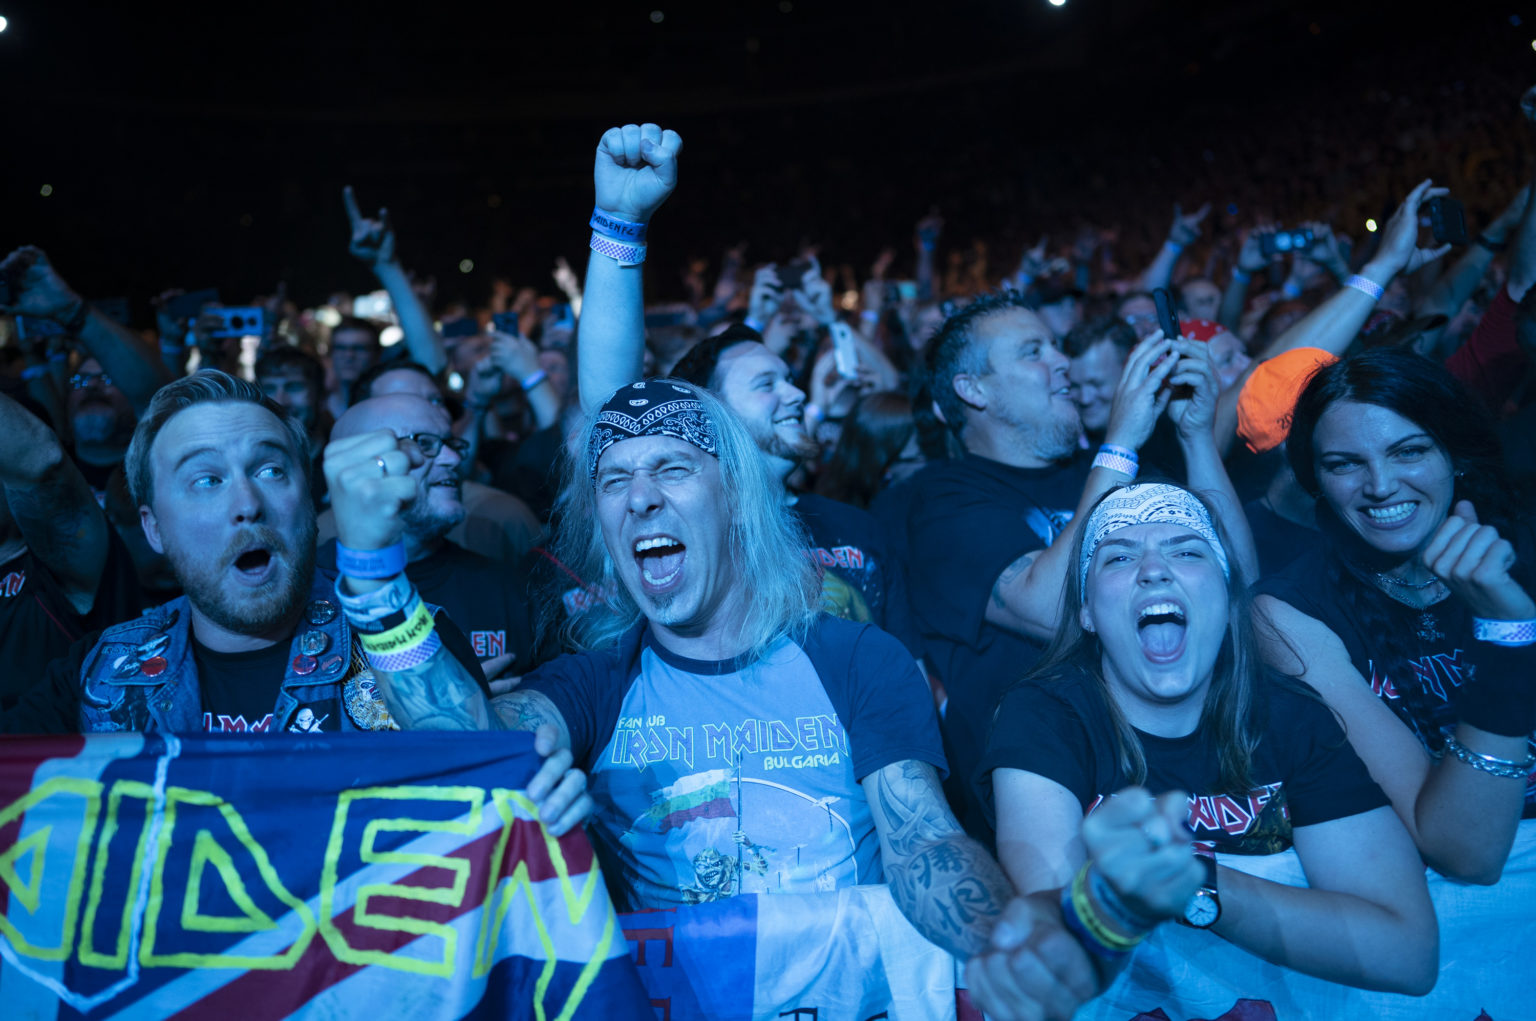 How to get Iron Maiden 2022 presale codes for their Legacy tour